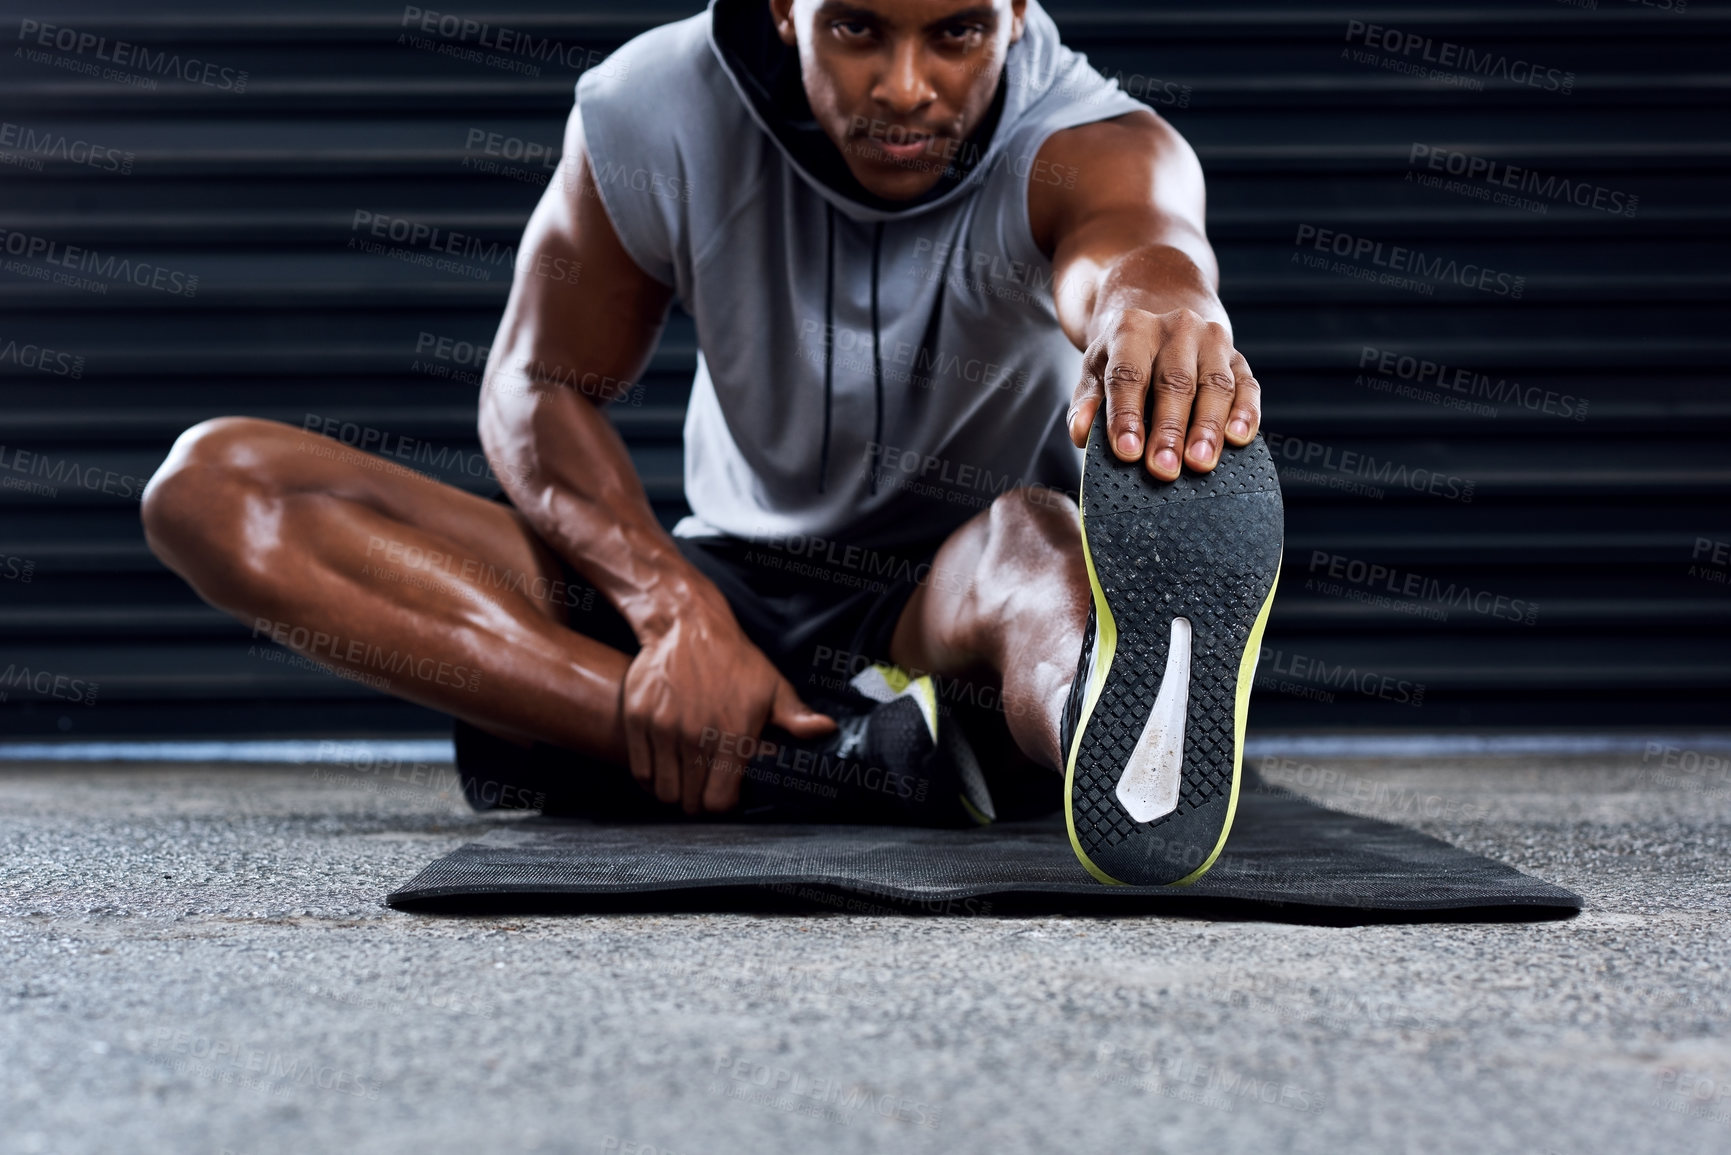 Buy stock photo Shot of a sporty young man stretching his legs as part of his exercise routine